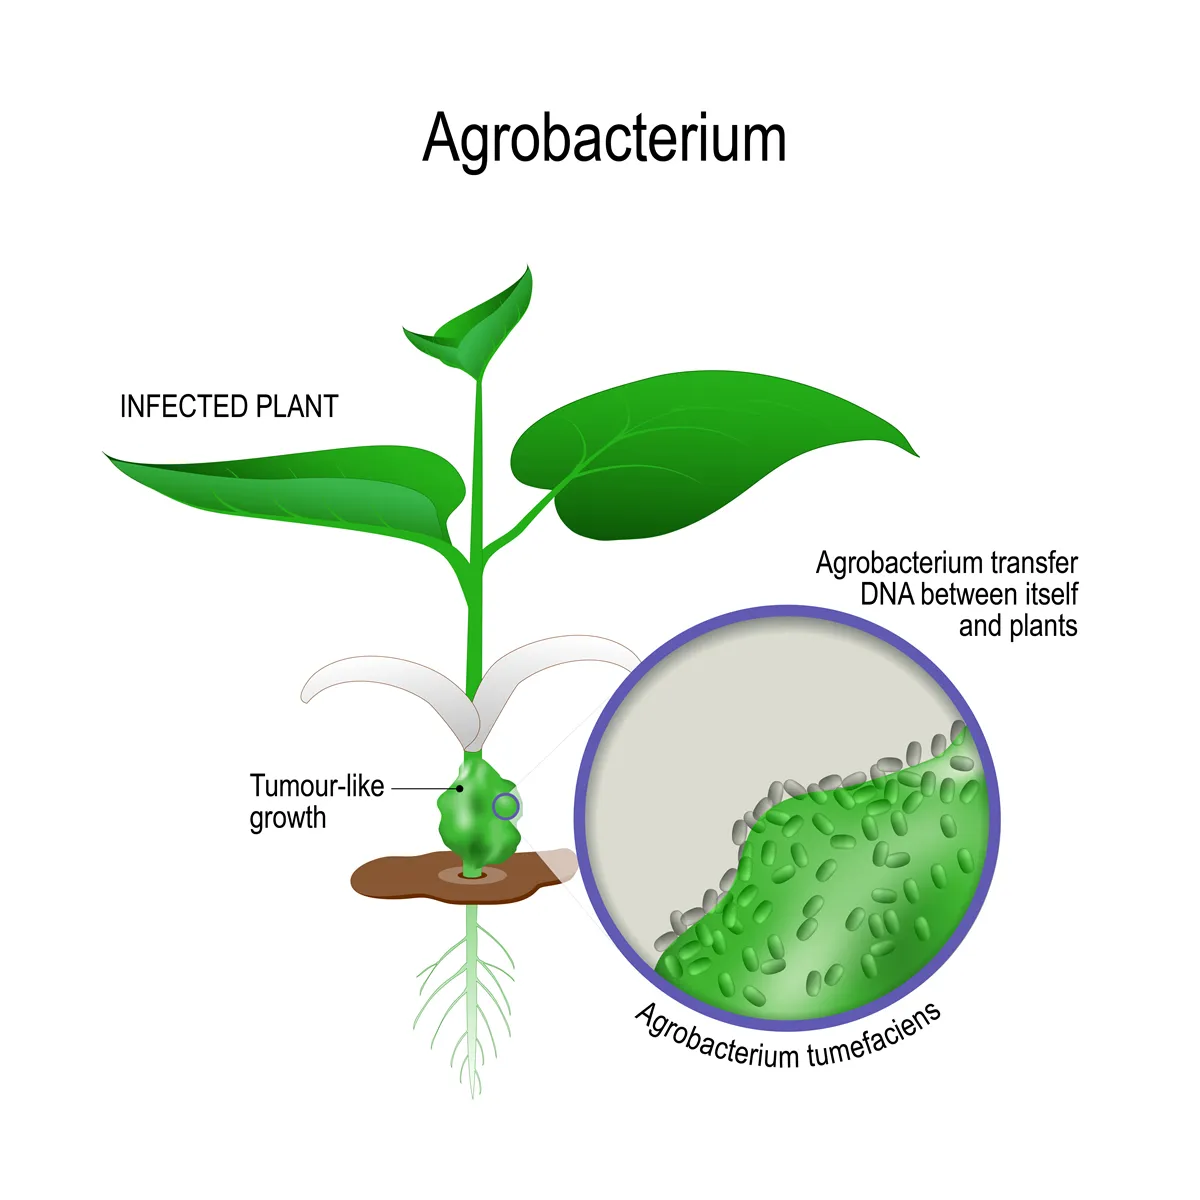 infected plant and close-up of Agrobacterium tumefaciens. agrobacterium transfer dna between itself and plants. genetic engineering. illustration for biological, science, and medical use.